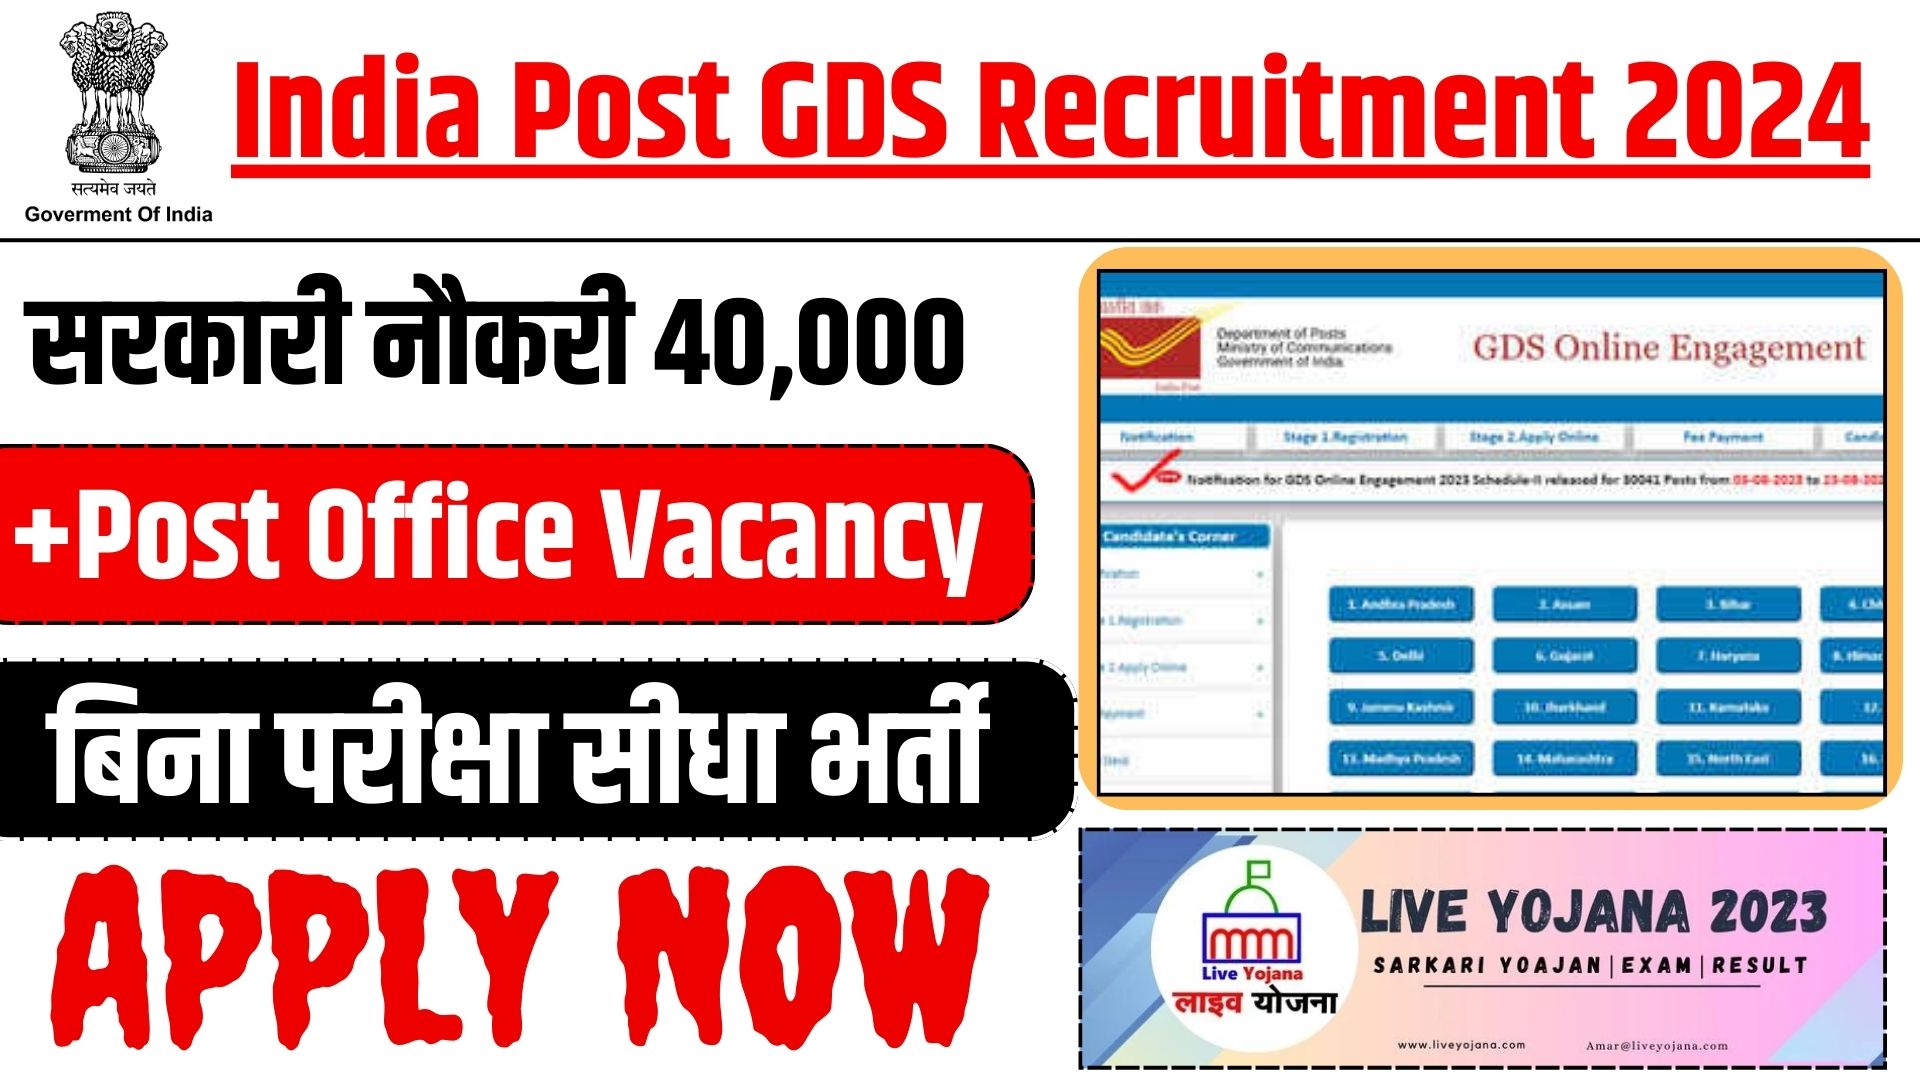 India Post GDS Recruitment 2024 India Post GDS Vacancy Post Office Online Form Post Office GDS notification